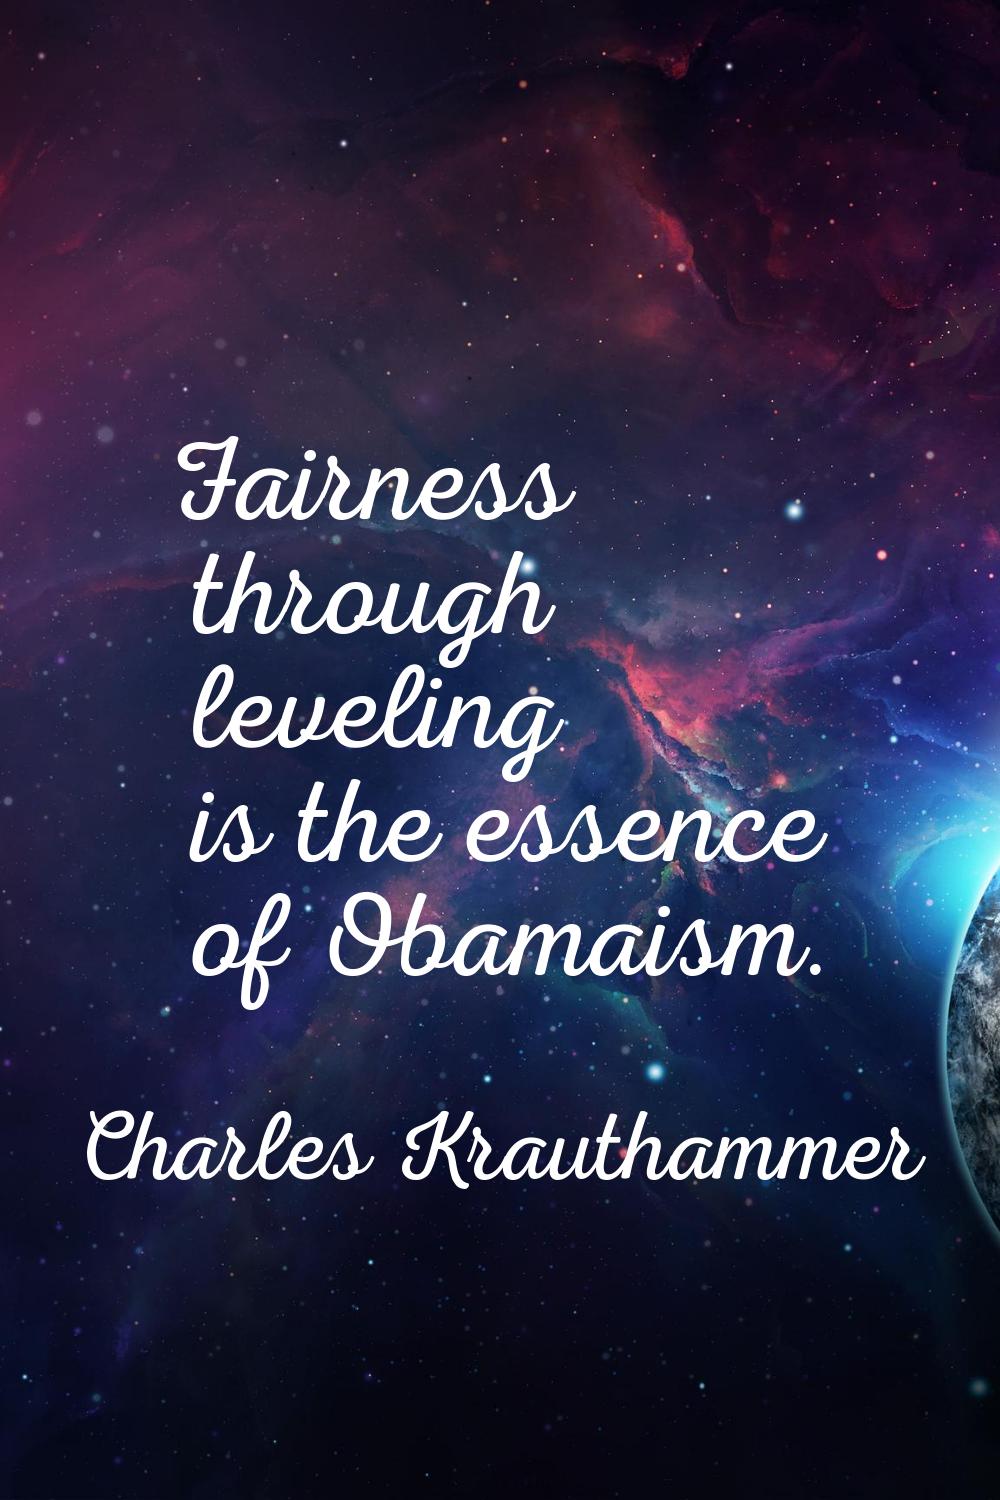 Fairness through leveling is the essence of Obamaism.